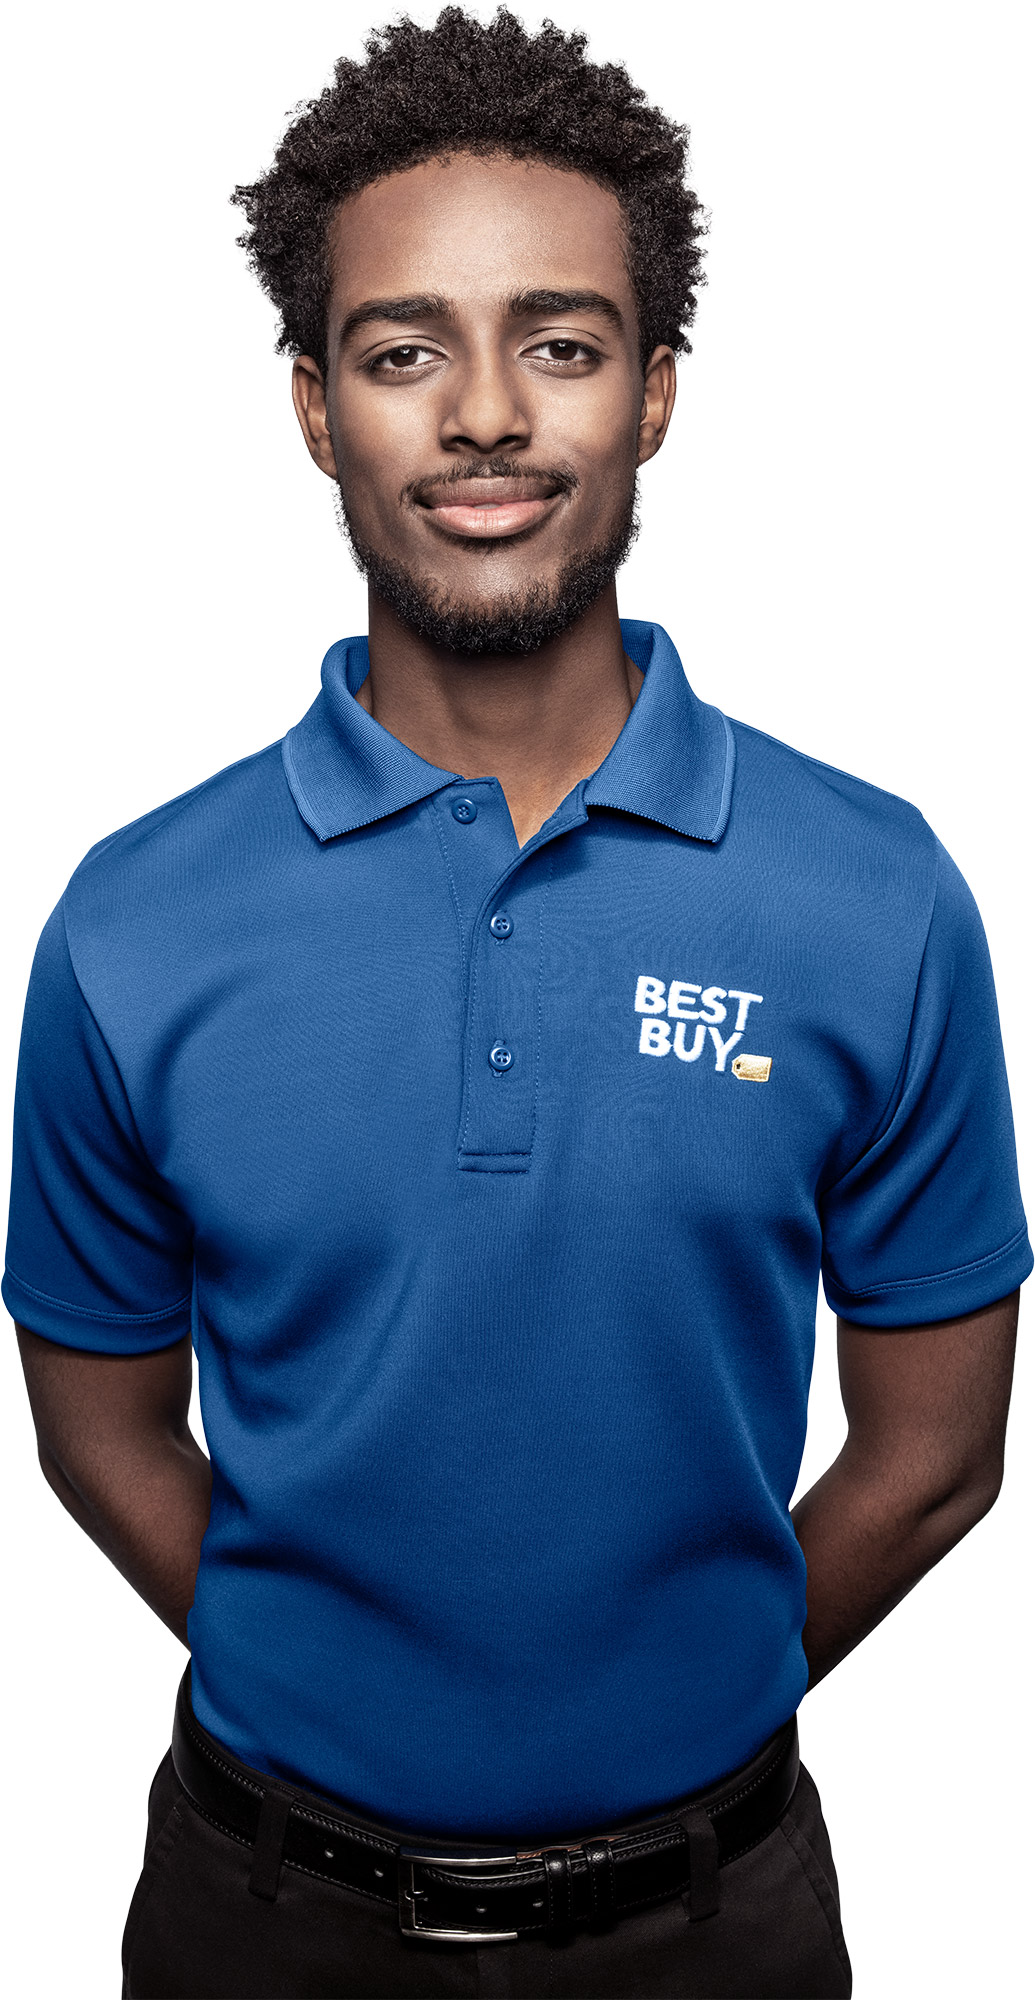 Best Buy associate welcoming you to contact us